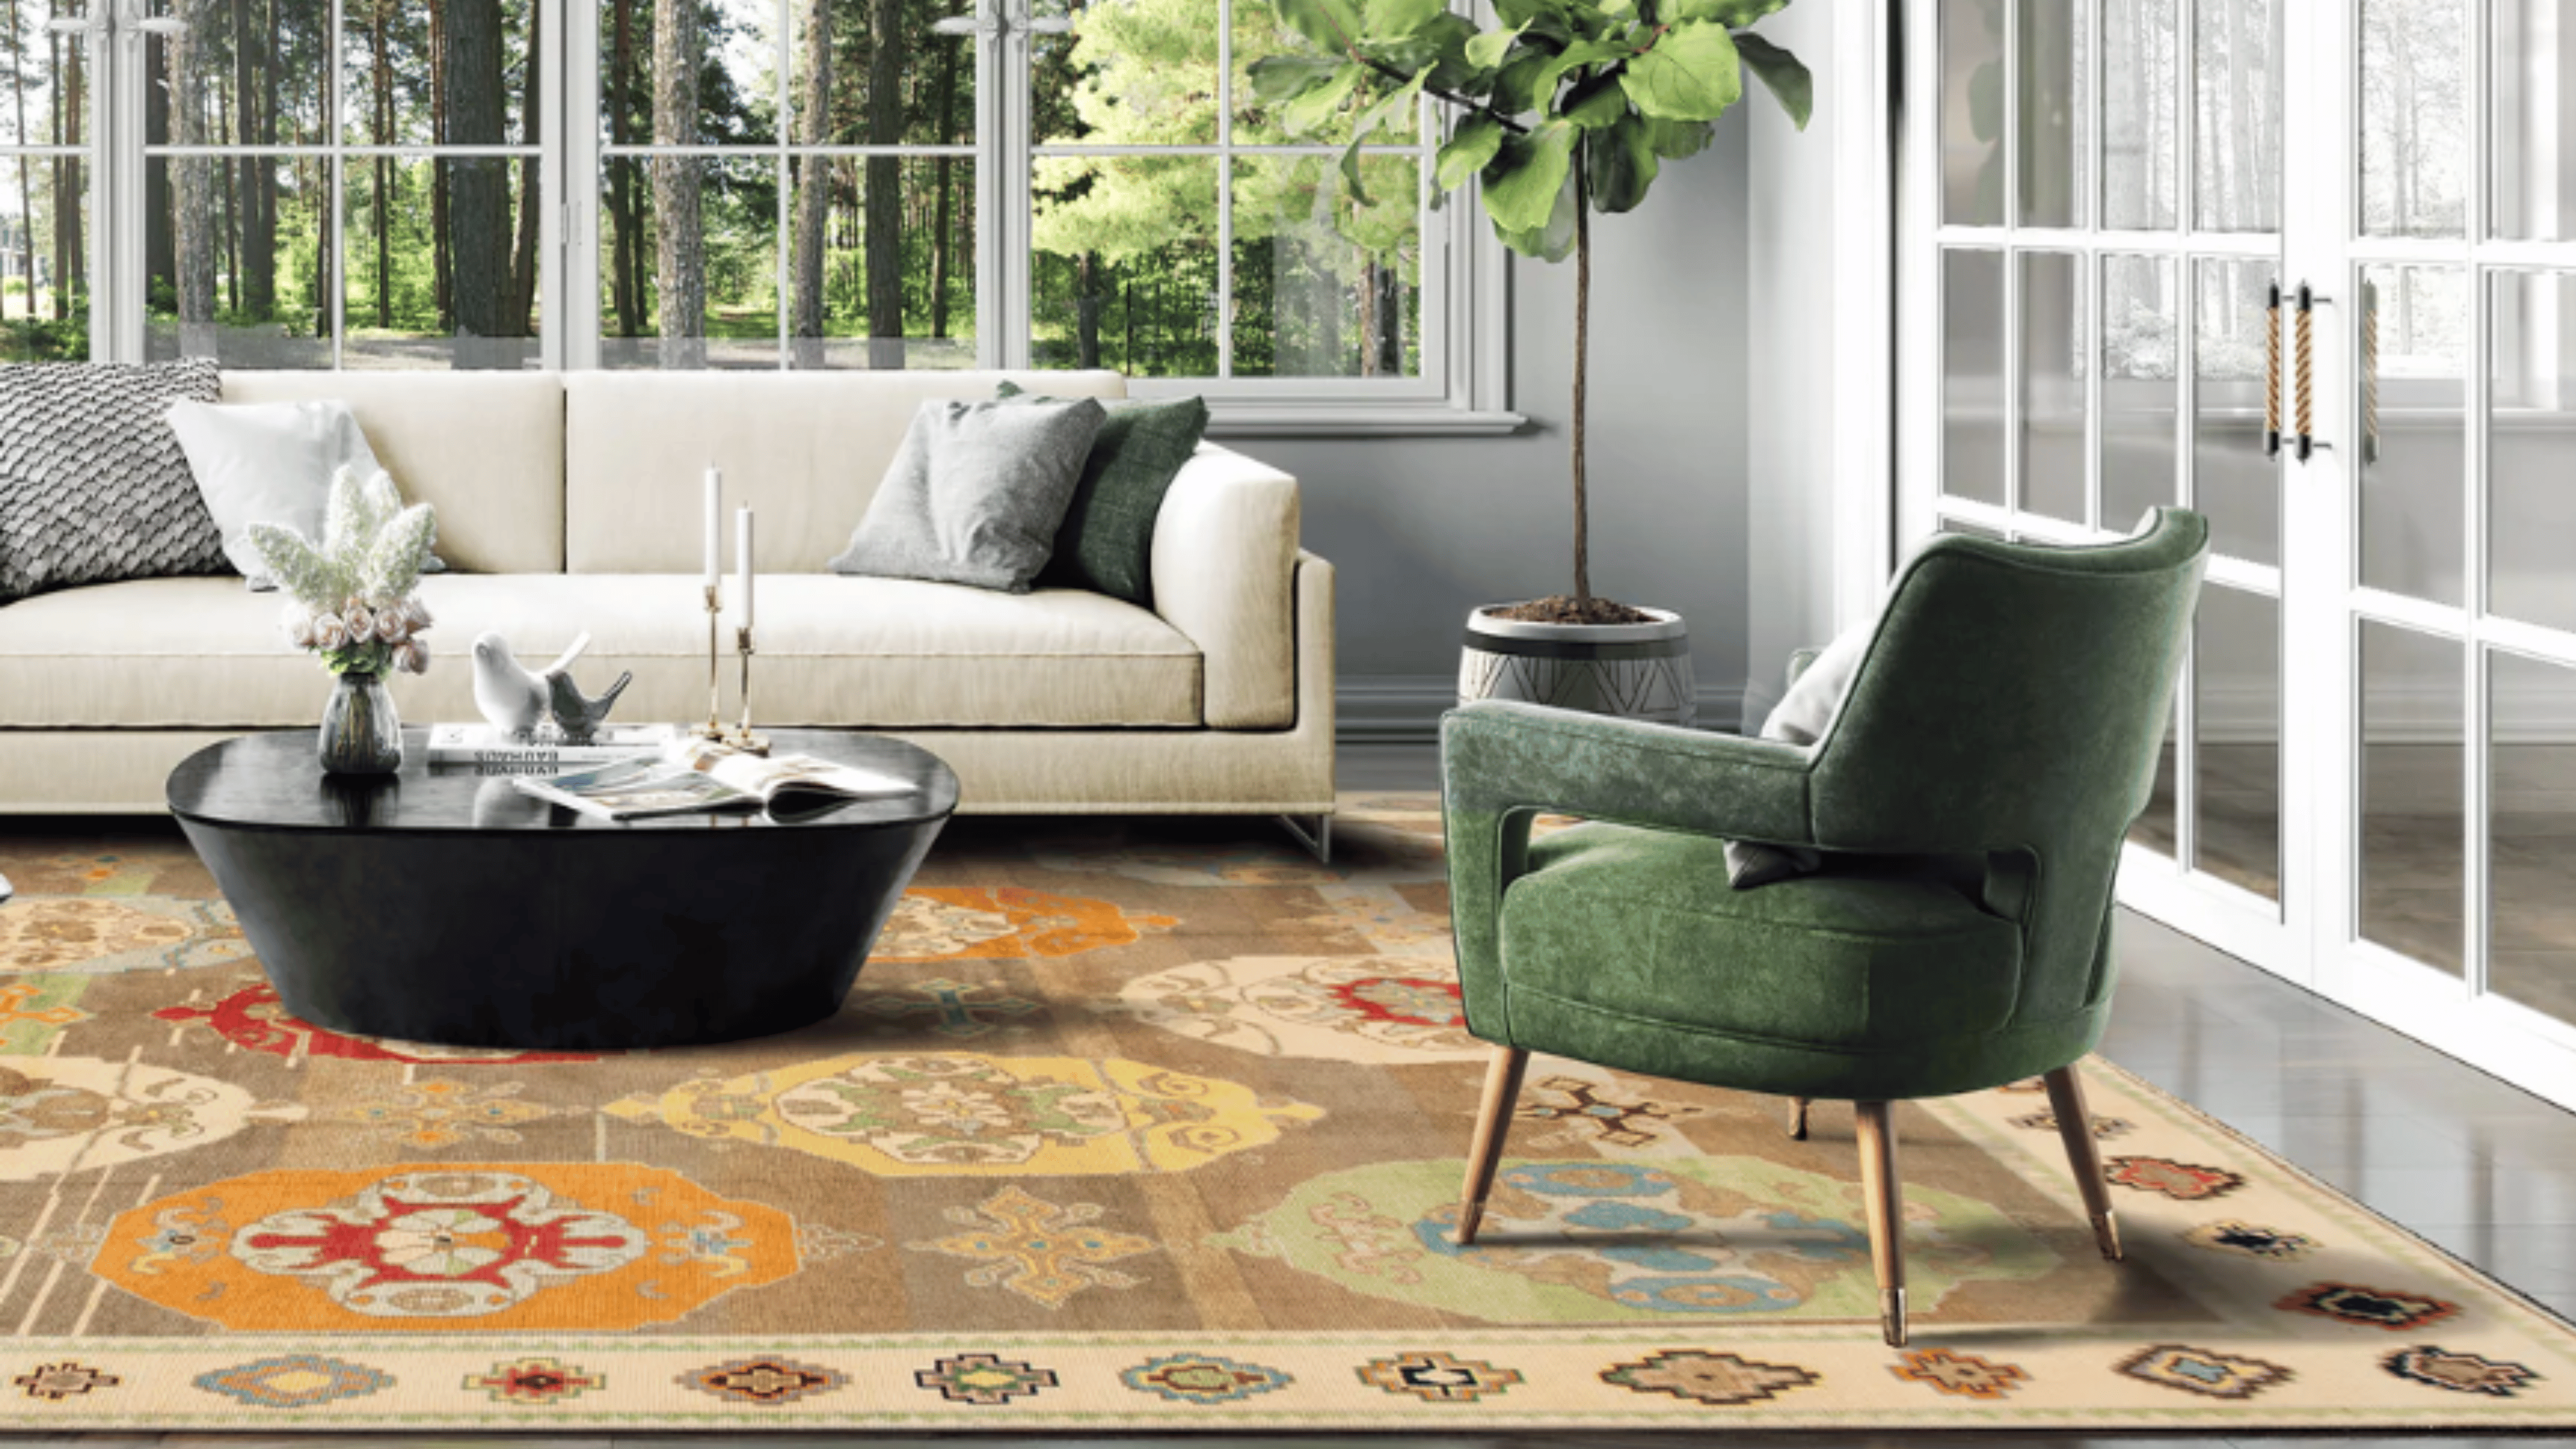 Why Oushak Rugs Are Popular With Designers